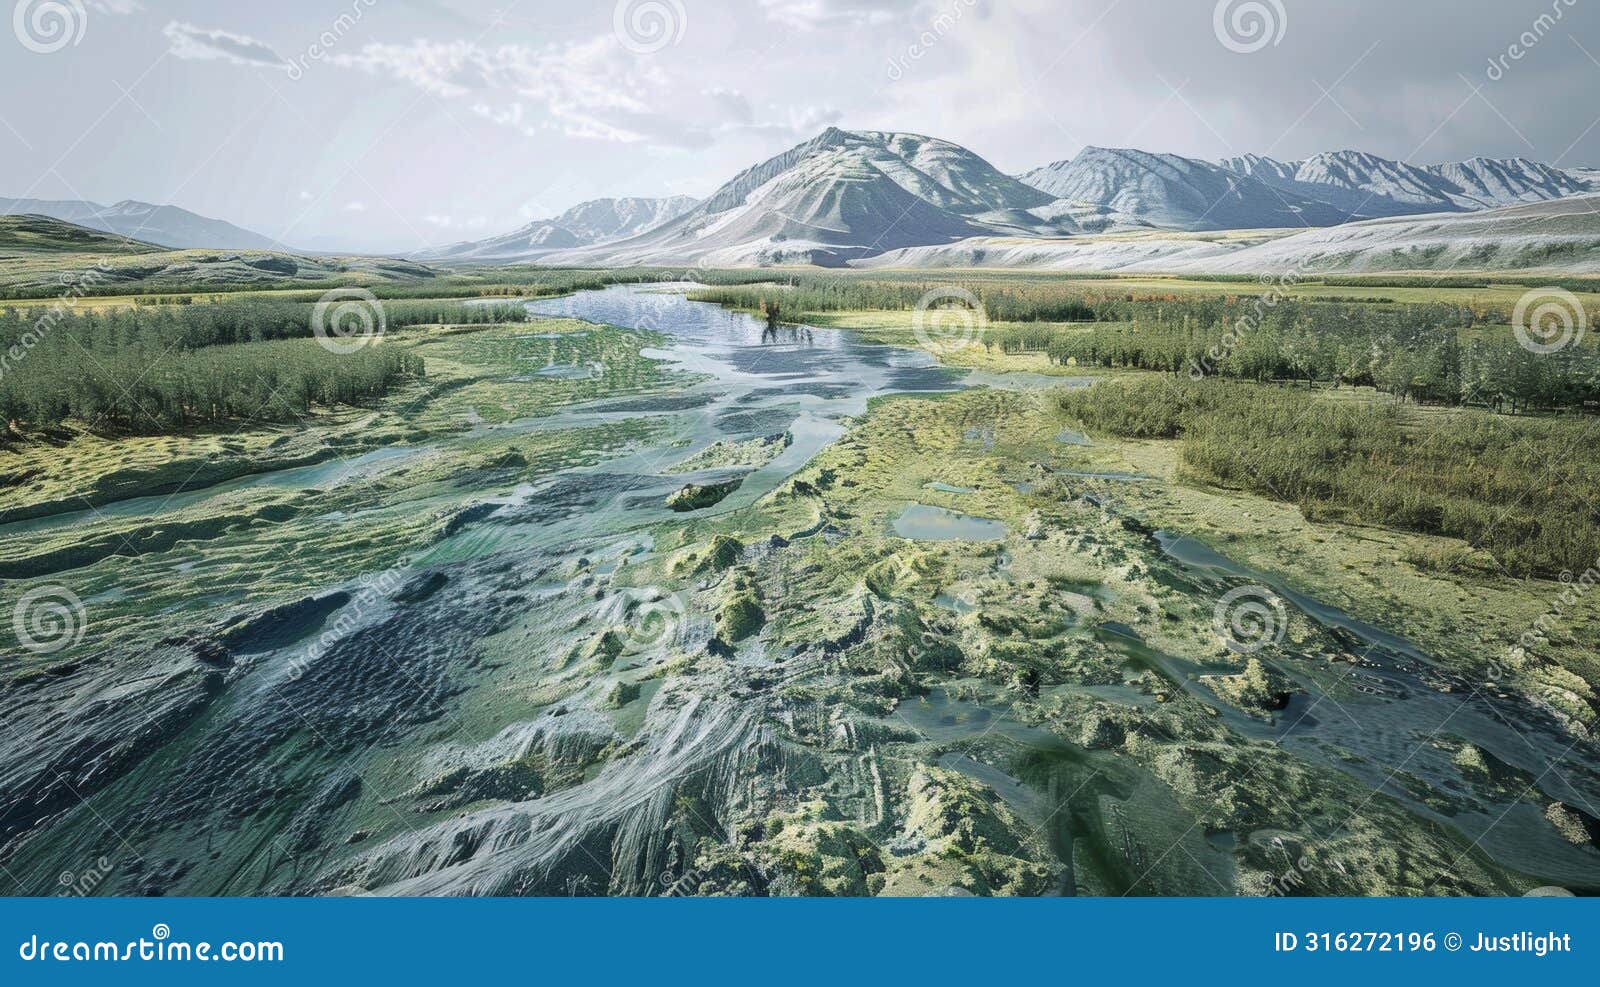 a 3d model of a landscape ed to simulate the effects of climate change and demonstrate the importance of